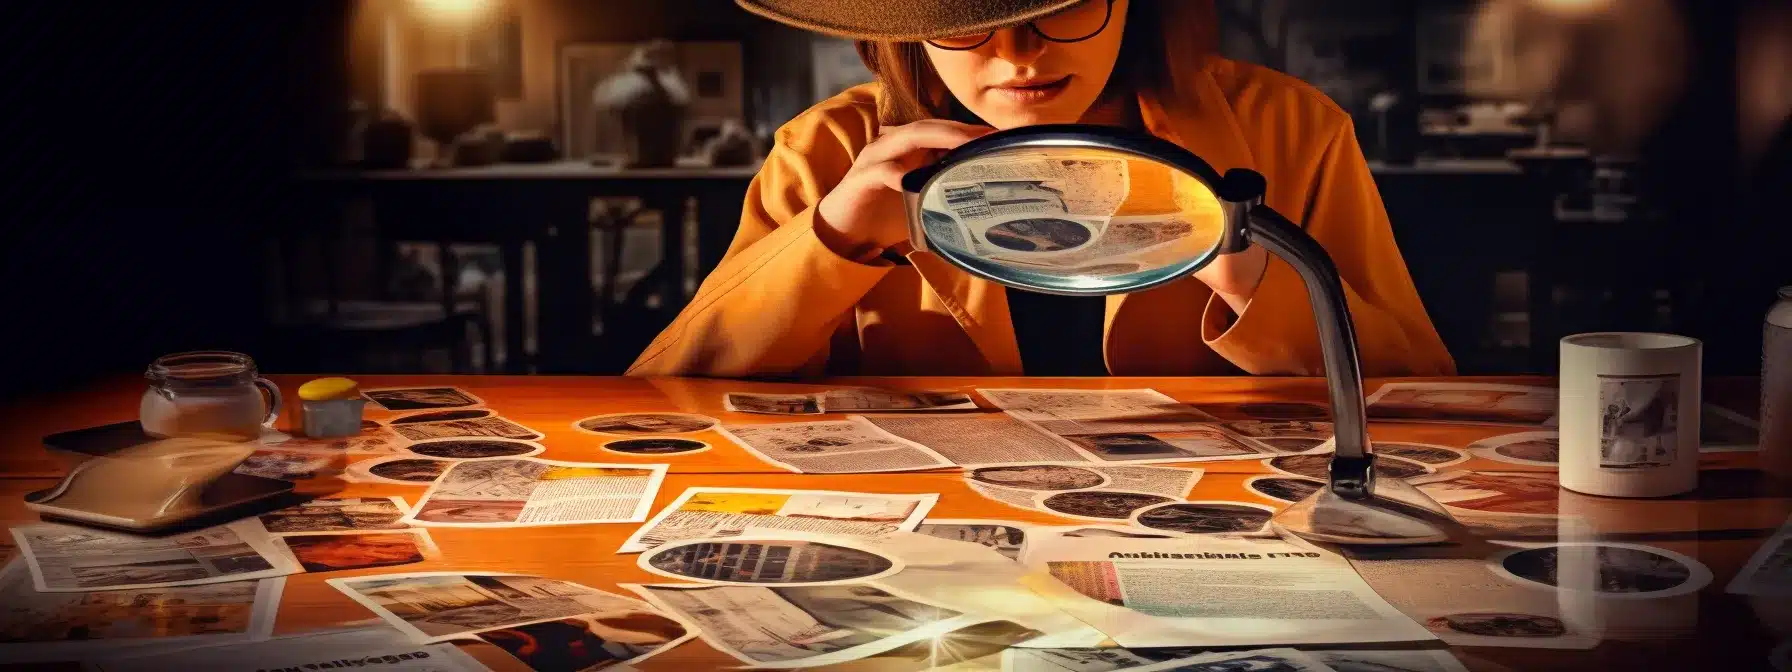 A Person Wearing A Spy Disguise Looking Through A Magnifying Glass At A Board With Pictures And Information About Competitors.